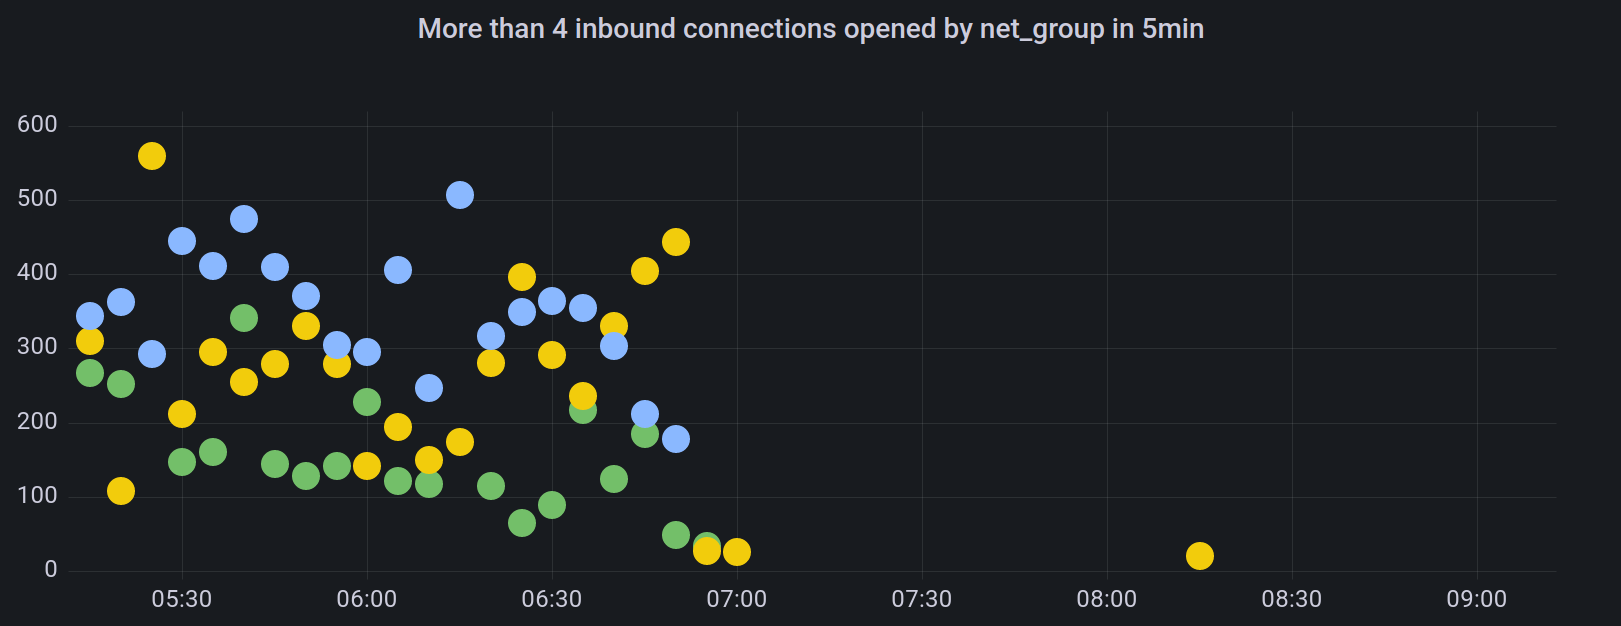 Showing a chart with a dot per net_group per five minutes. There are three net_groups with more than 100 connections per 5 min.